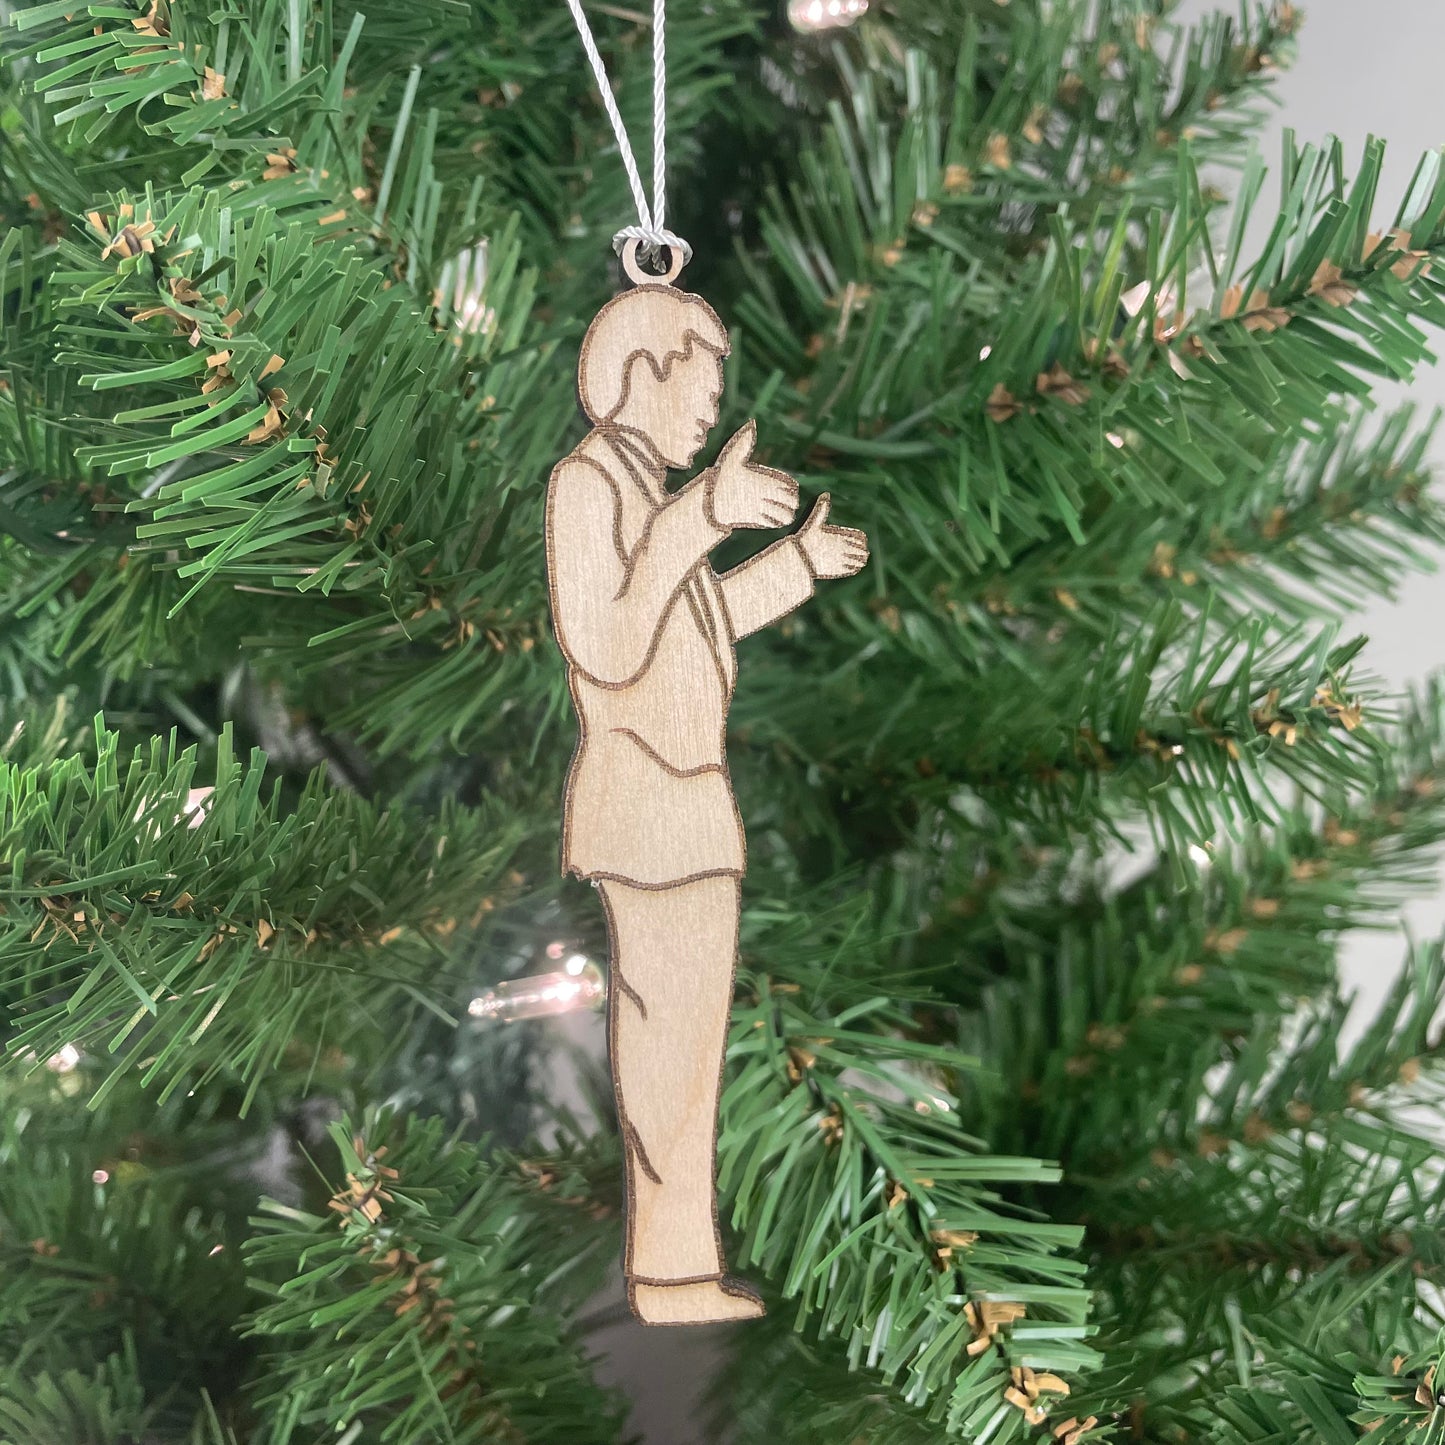 Band Director (Male) Engraved Wood Ornament